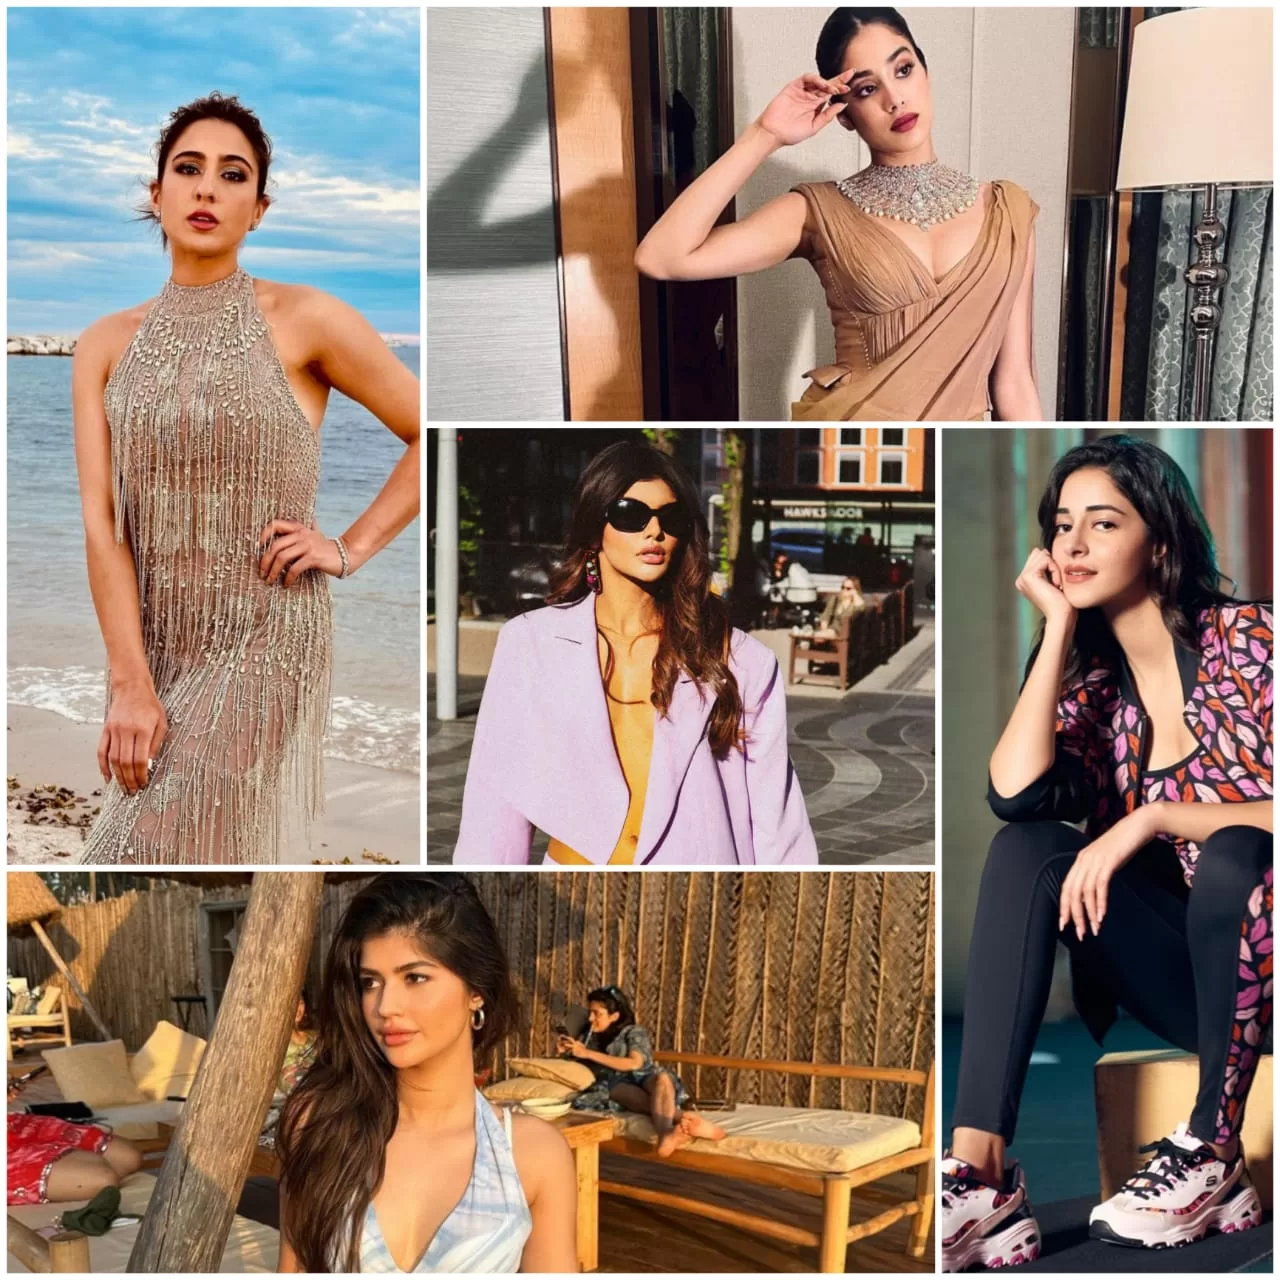 From Janhvi Kapoor’s gym wear to Richa Ravi Sinha’s Classy fashion choices to Ananya Panday’s party outfits ; Top 5 GenZ Actresses Redefining Fashion